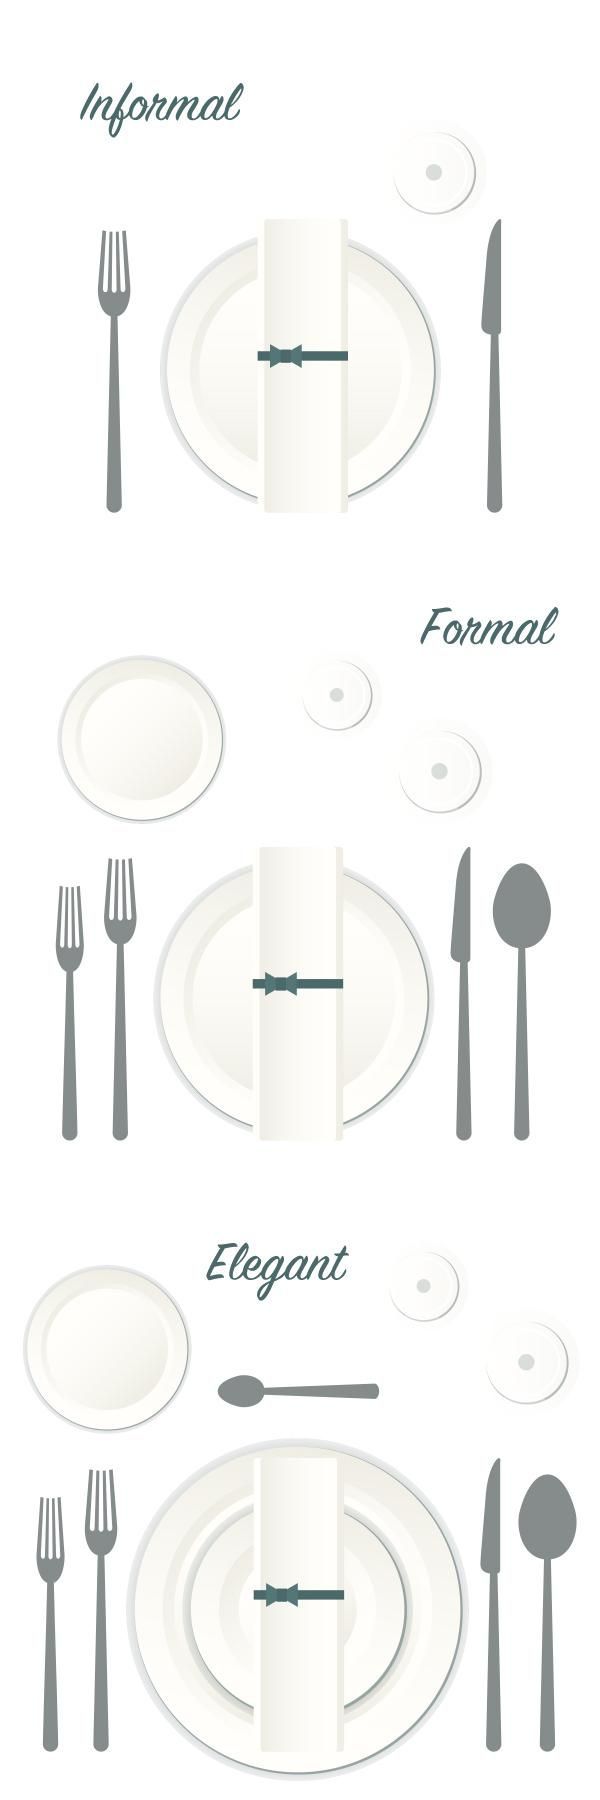 Learn how to set the dinner table for every occasion! Kirkland’s shows you table settings for informal, formal and elegant events.